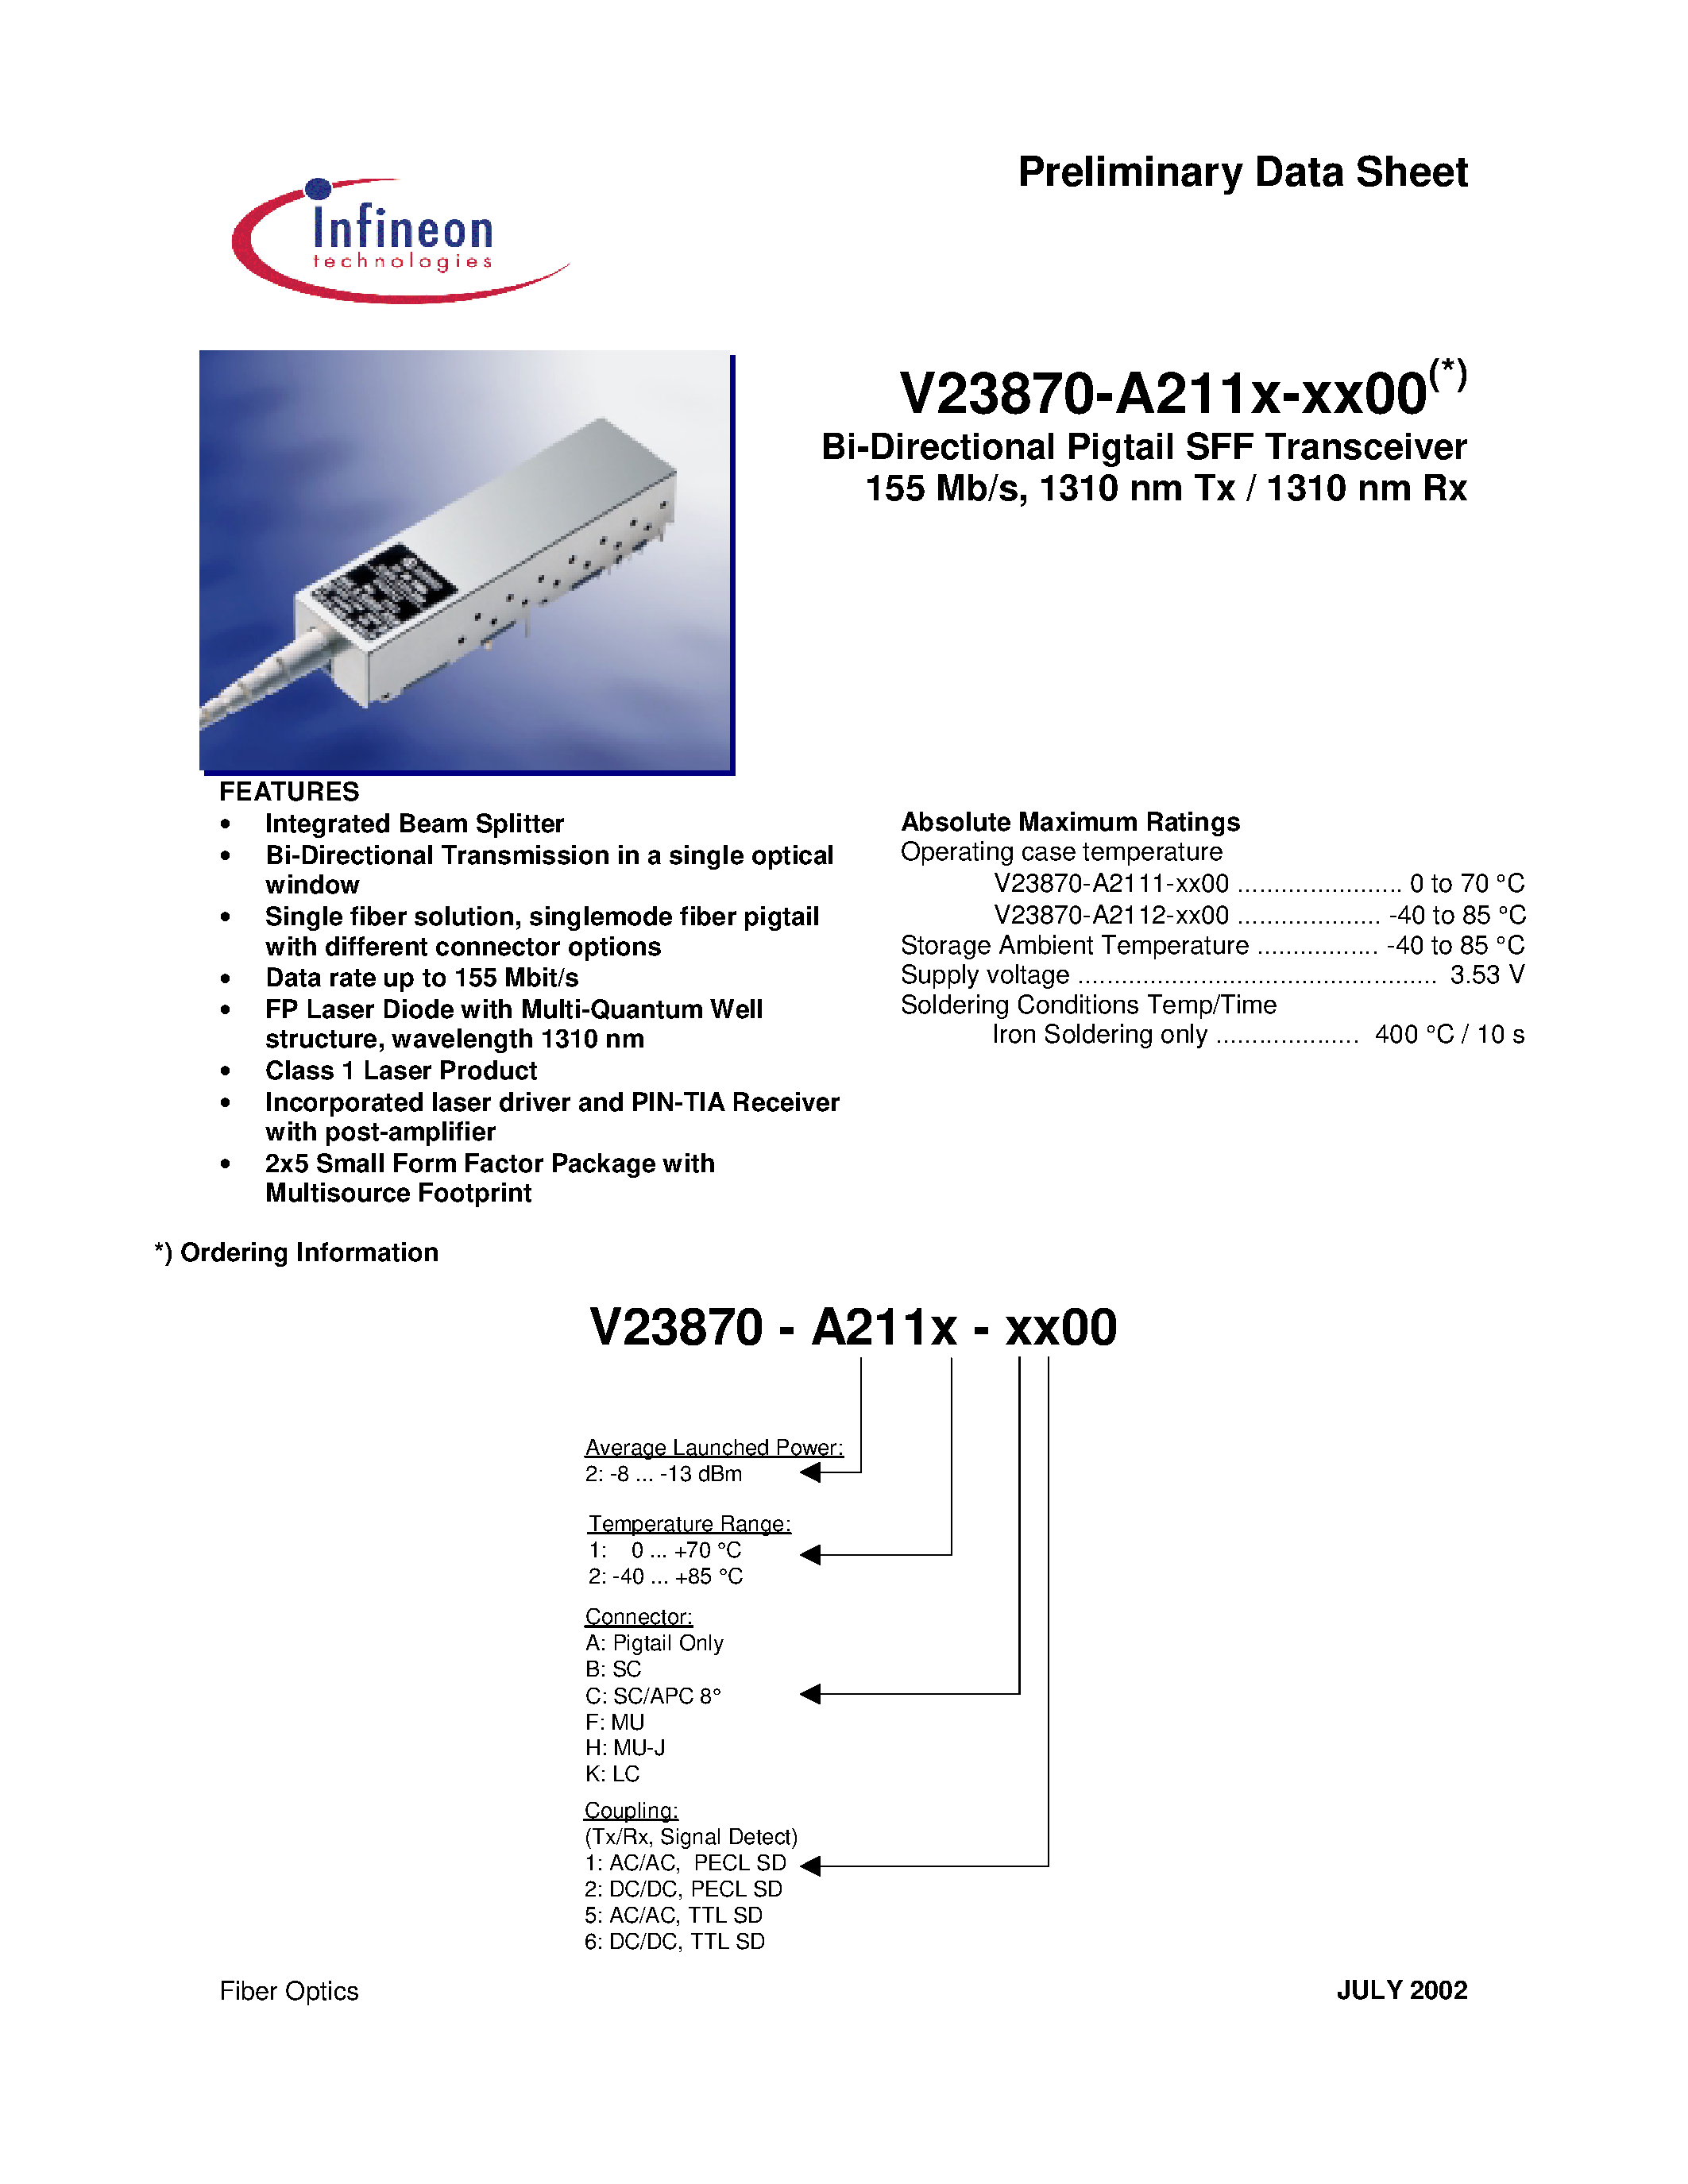 Datasheet V23870-A2111-H600 - Bi-Directional Pigtail SFF Transceiver 155 Mb/s/ 1310 nm Tx / 1310 nm Rx page 1